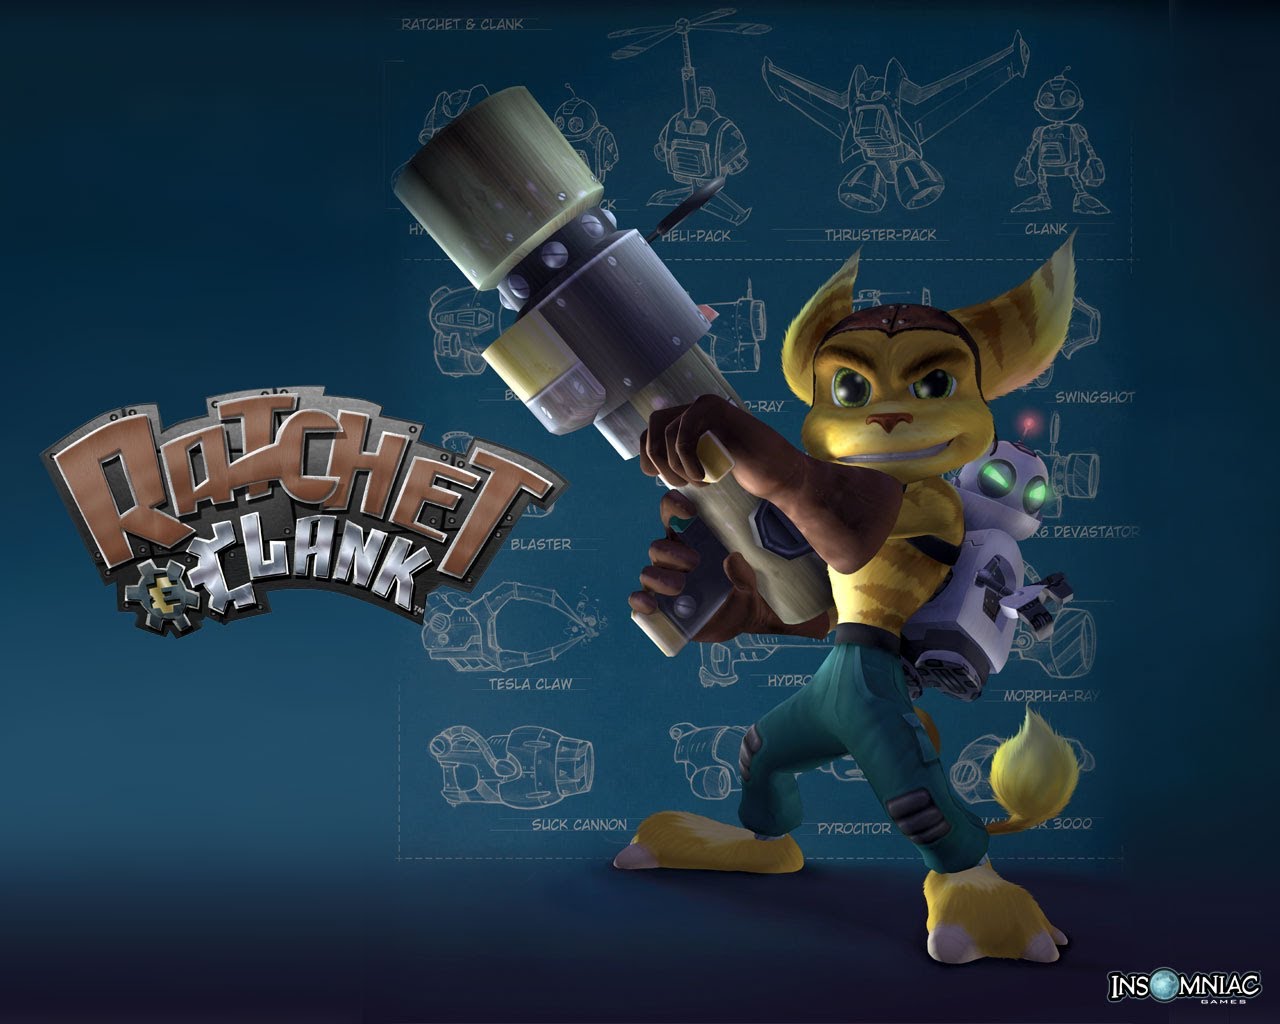 ratchet and clank 1 review